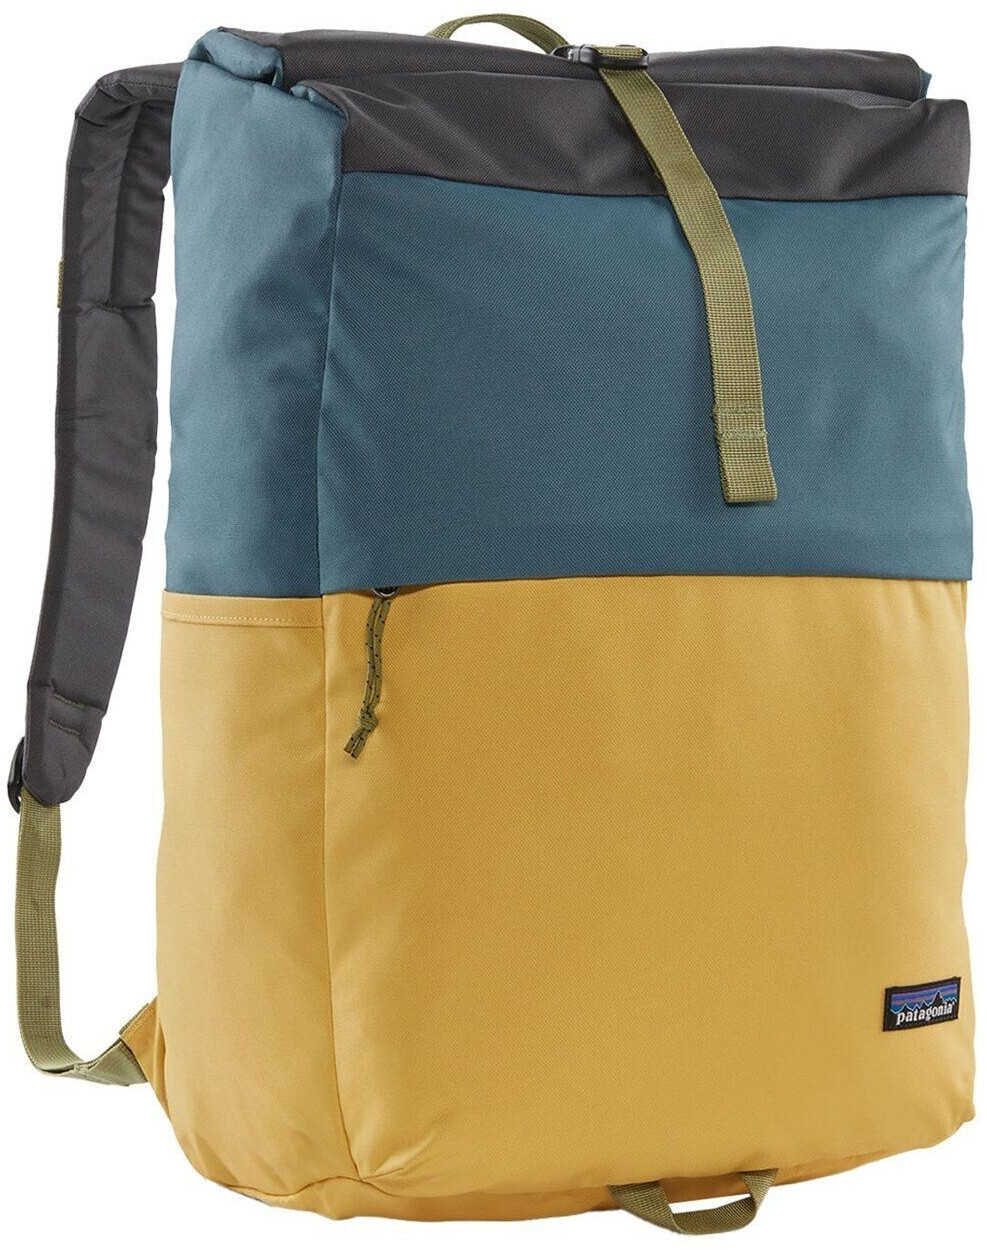 Photos - Backpack Patagonia Fieldsmith Roll Top Pack 30L  patchwork/surfboa (48541)